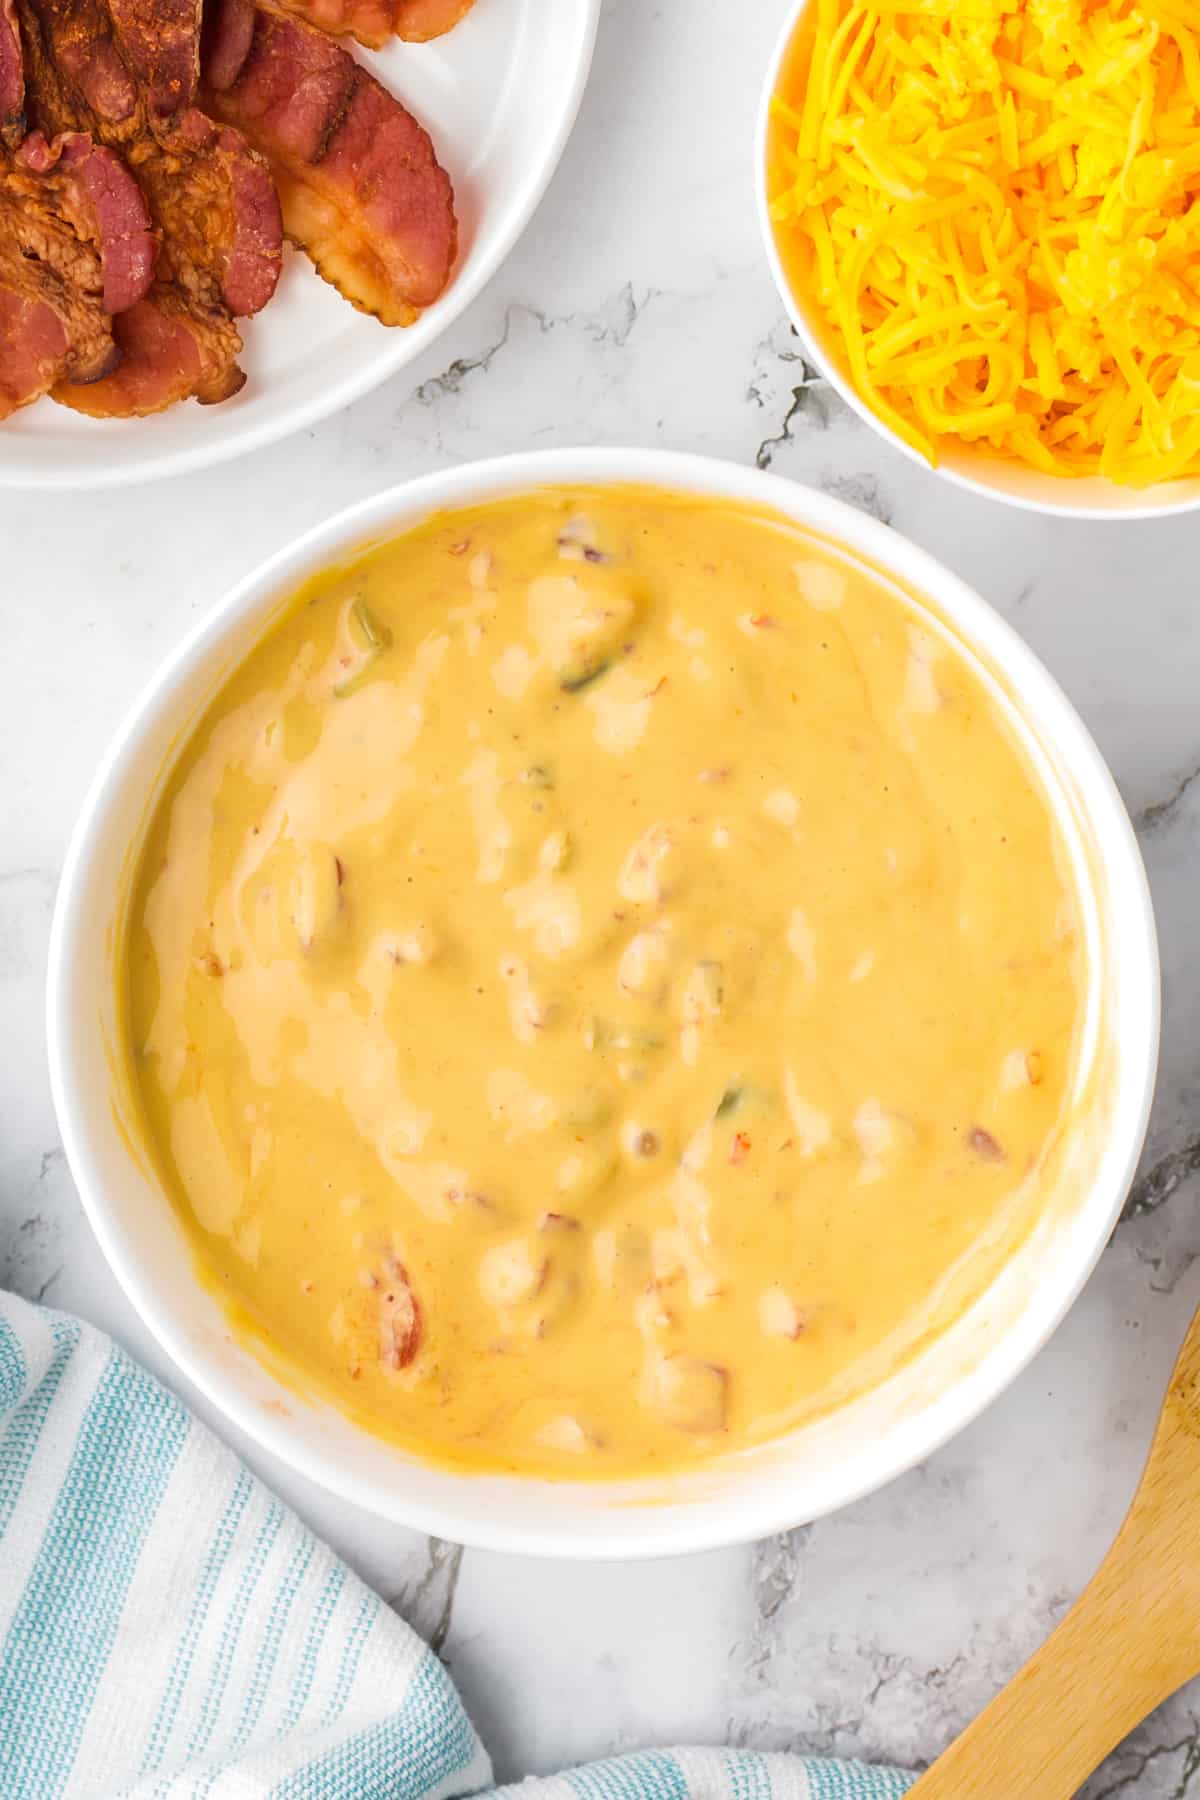 A large bowl of melted nacho cheese dip, with bowls of shredded cheese and bacon on the side.